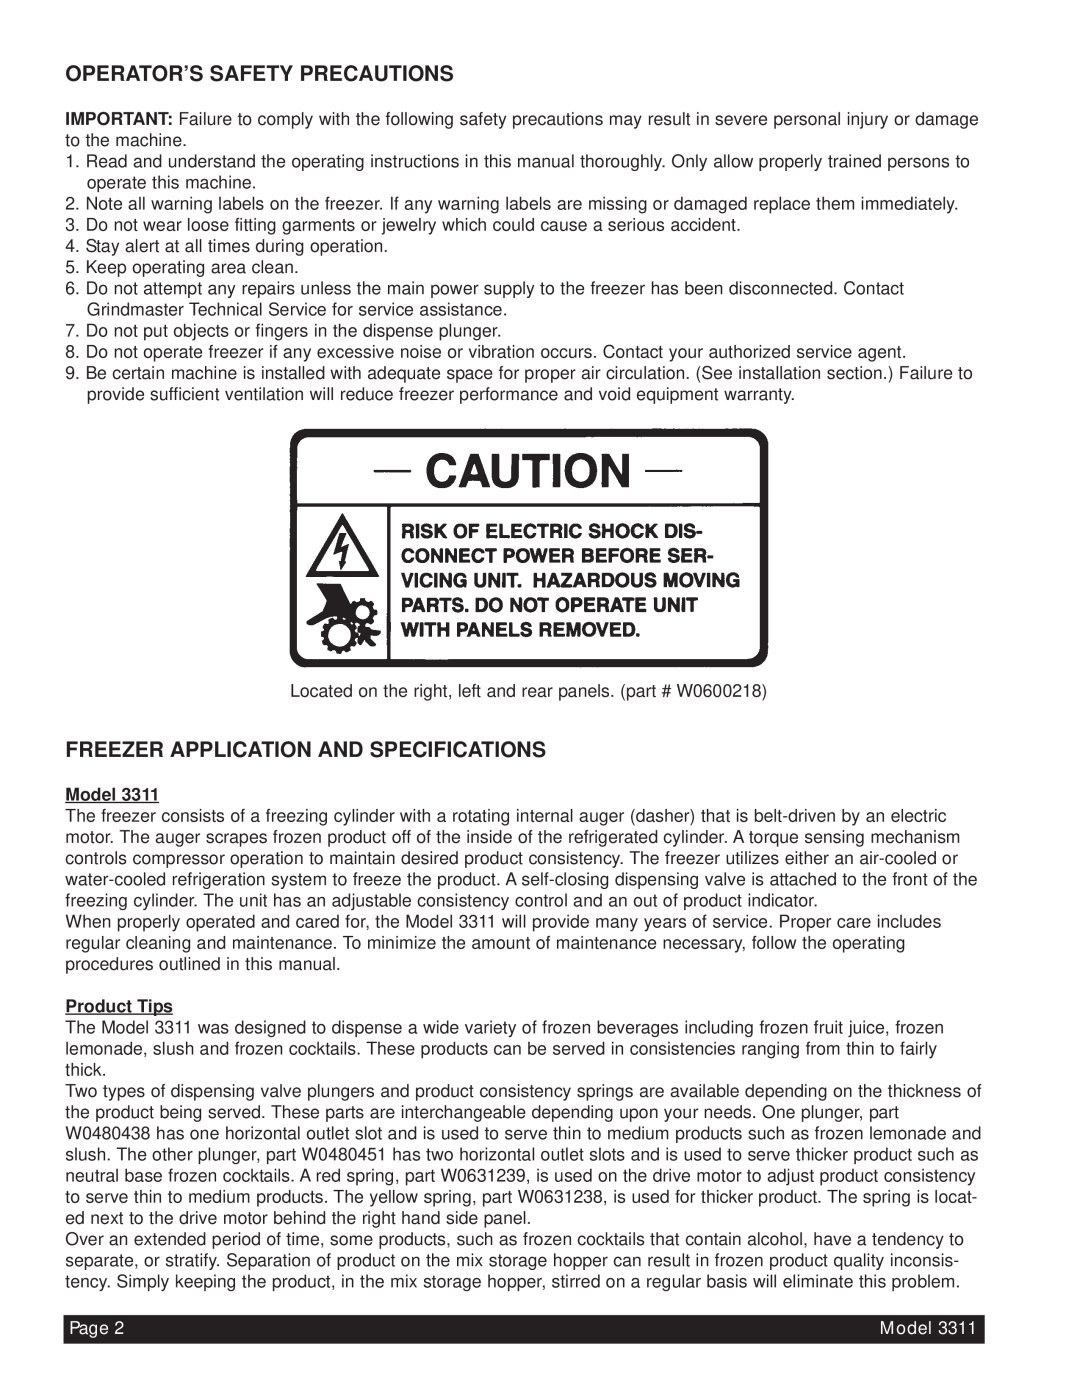 Beverage-Air 3311 manual Operator’S Safety Precautions, Freezer Application And Specifications, Model, Product Tips, Page 